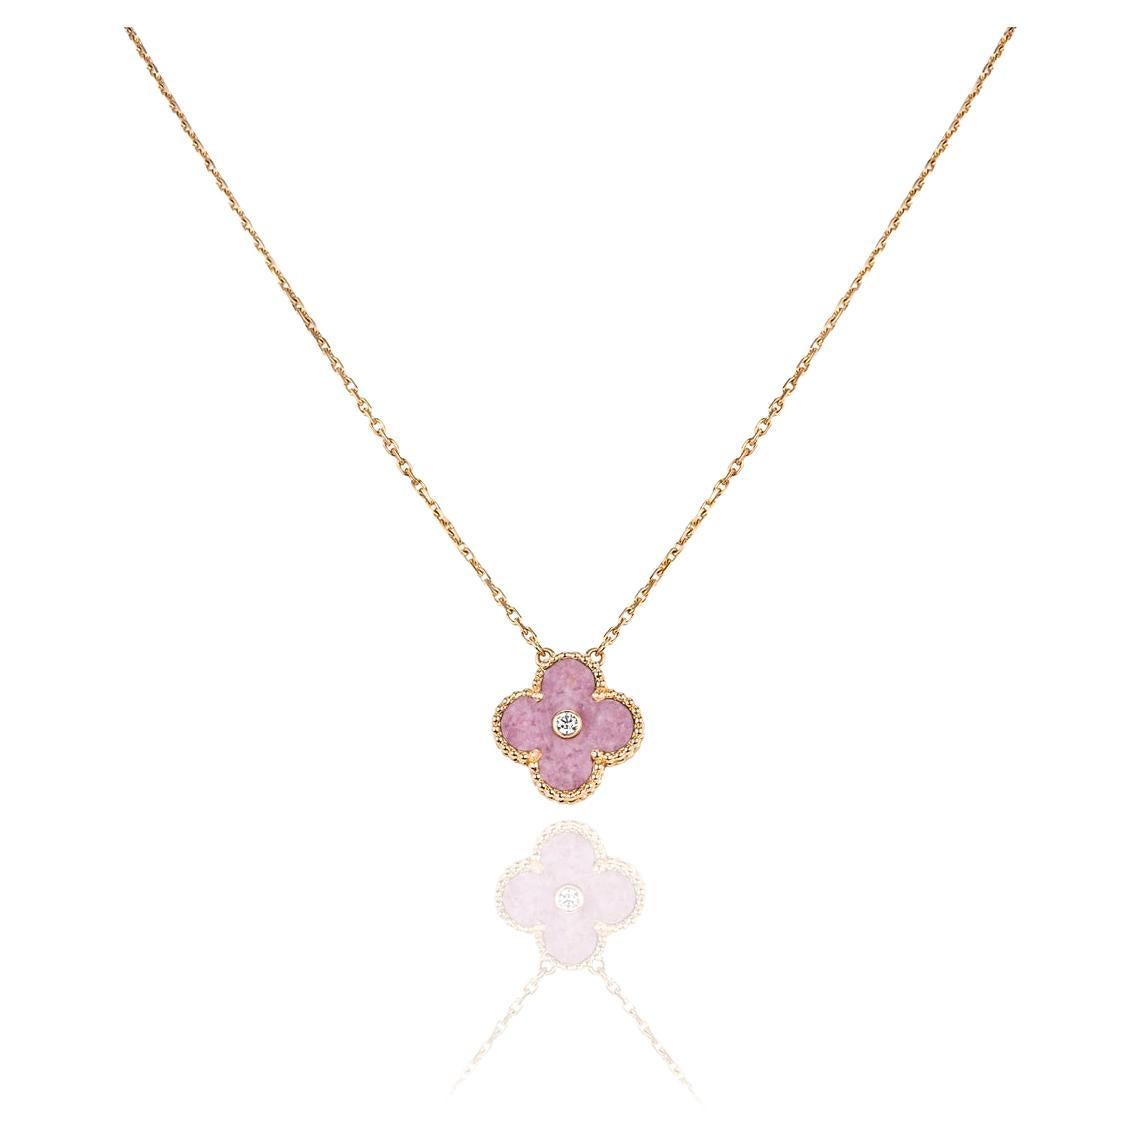 A limited edition 18k rose gold rhodonite and diamond Van Cleef & Arpels Vintage Alhambra pendant from the 2021 Holiday collection. The pendant features a beaded edge 4 leaf clover motif with a rhodonite inlay. Further complementing the inlay is a